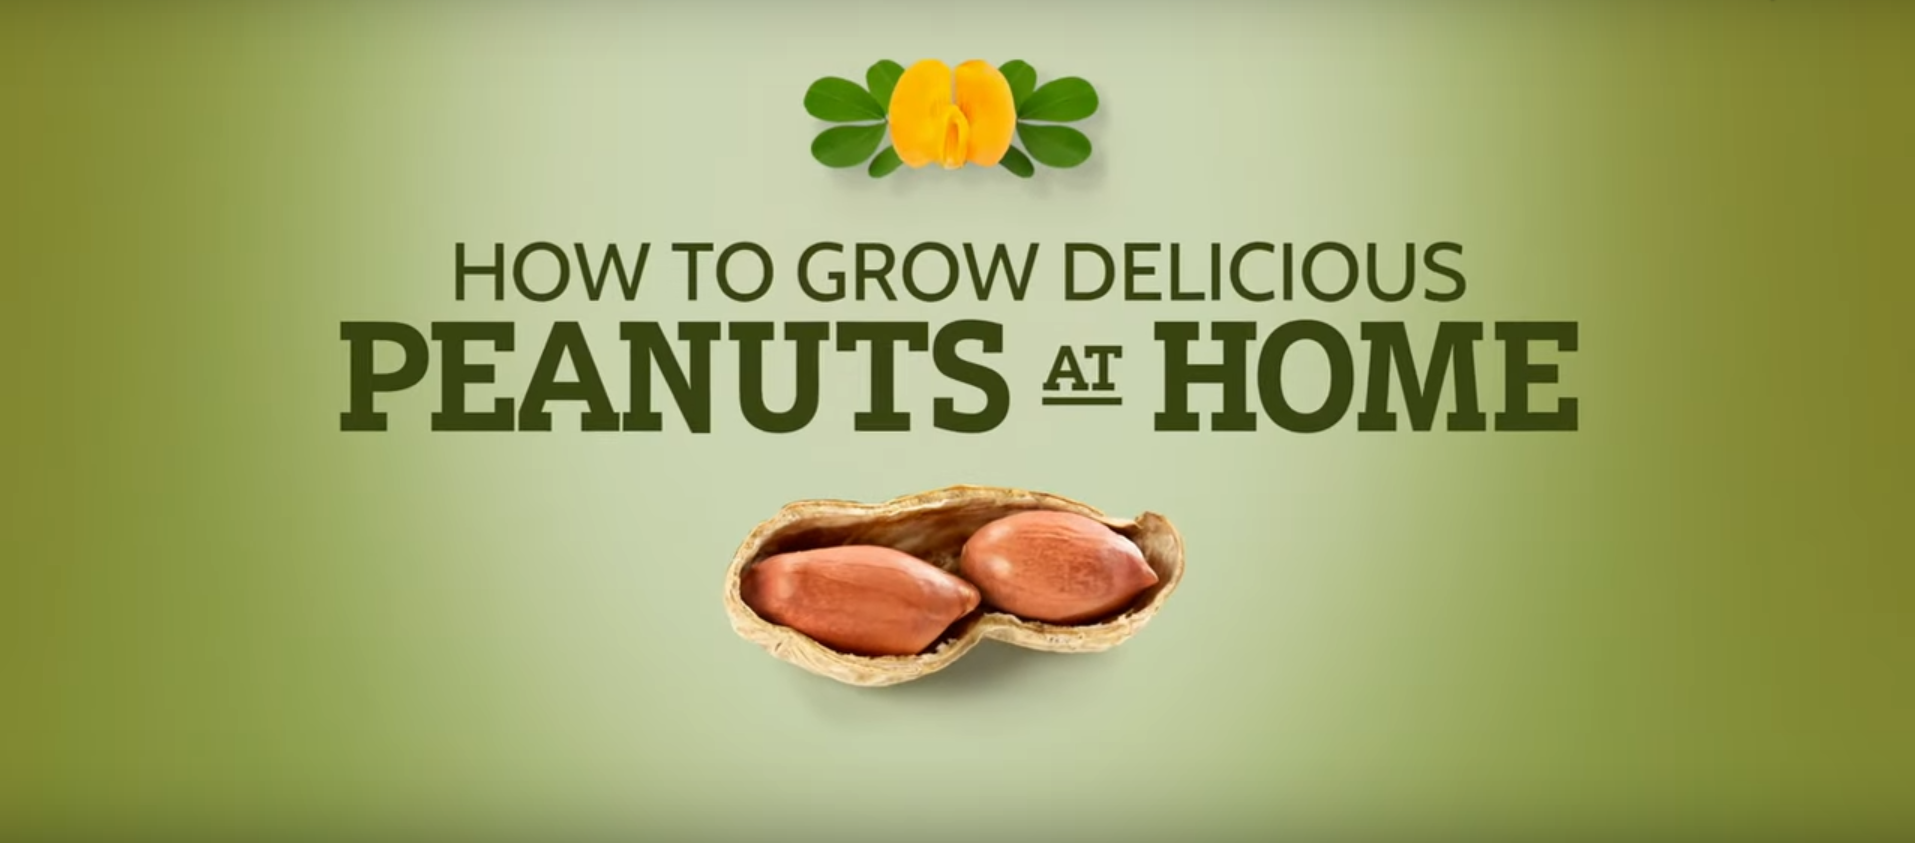 8 Simple Steps to Grow Your Own Peanuts at Home